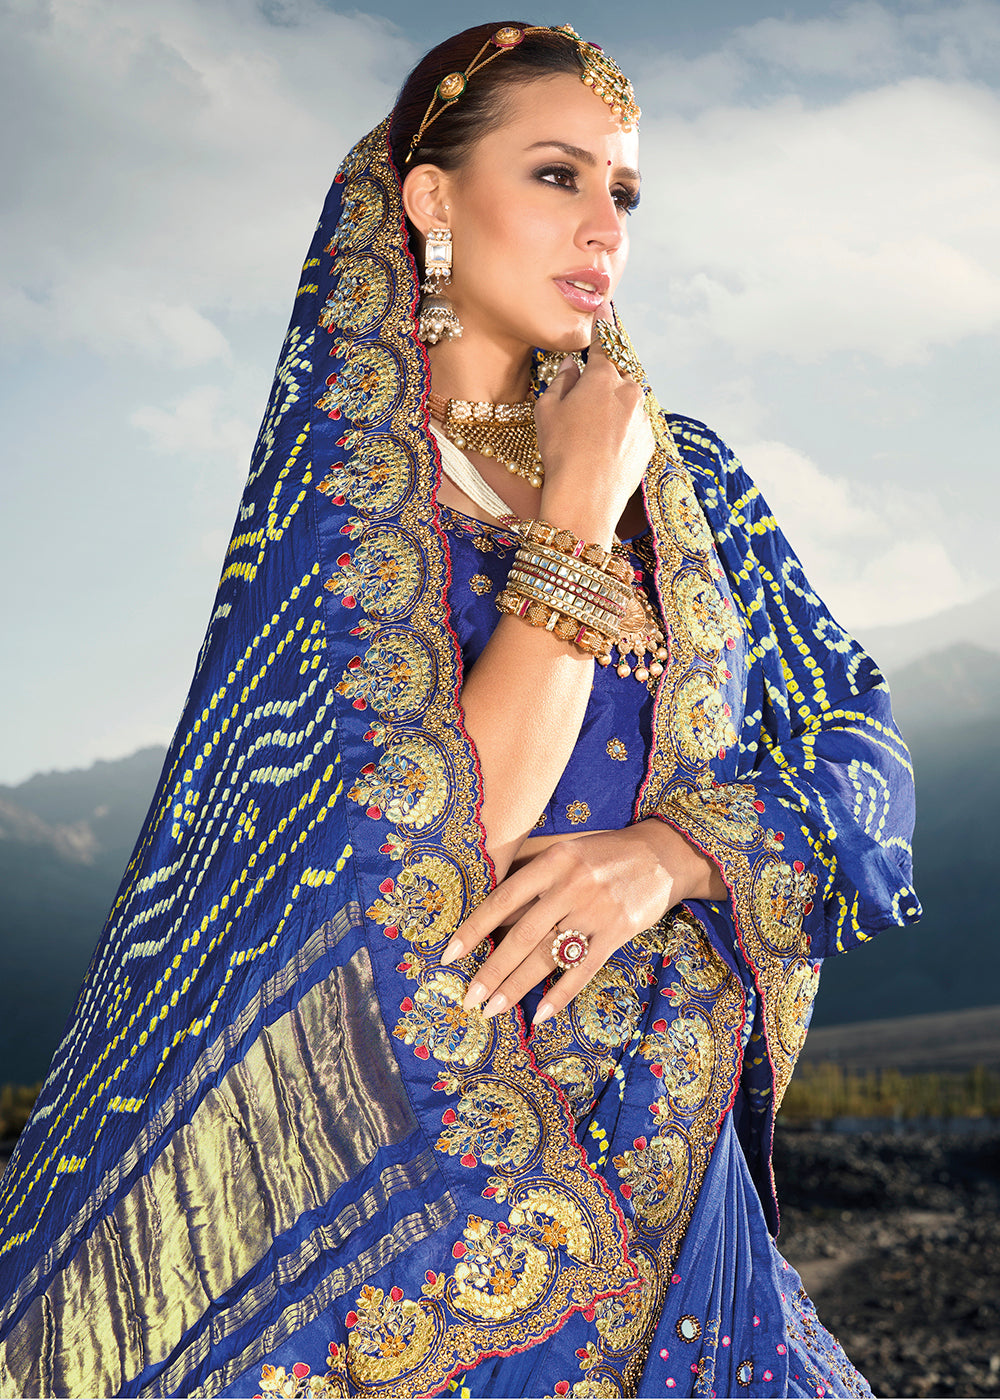 Shop Now Traditional Blue Embroidered Kachhi Bandhej Sateen Saree Saree from Empress Clothing in USA, UK, Canada & Worldwide. 